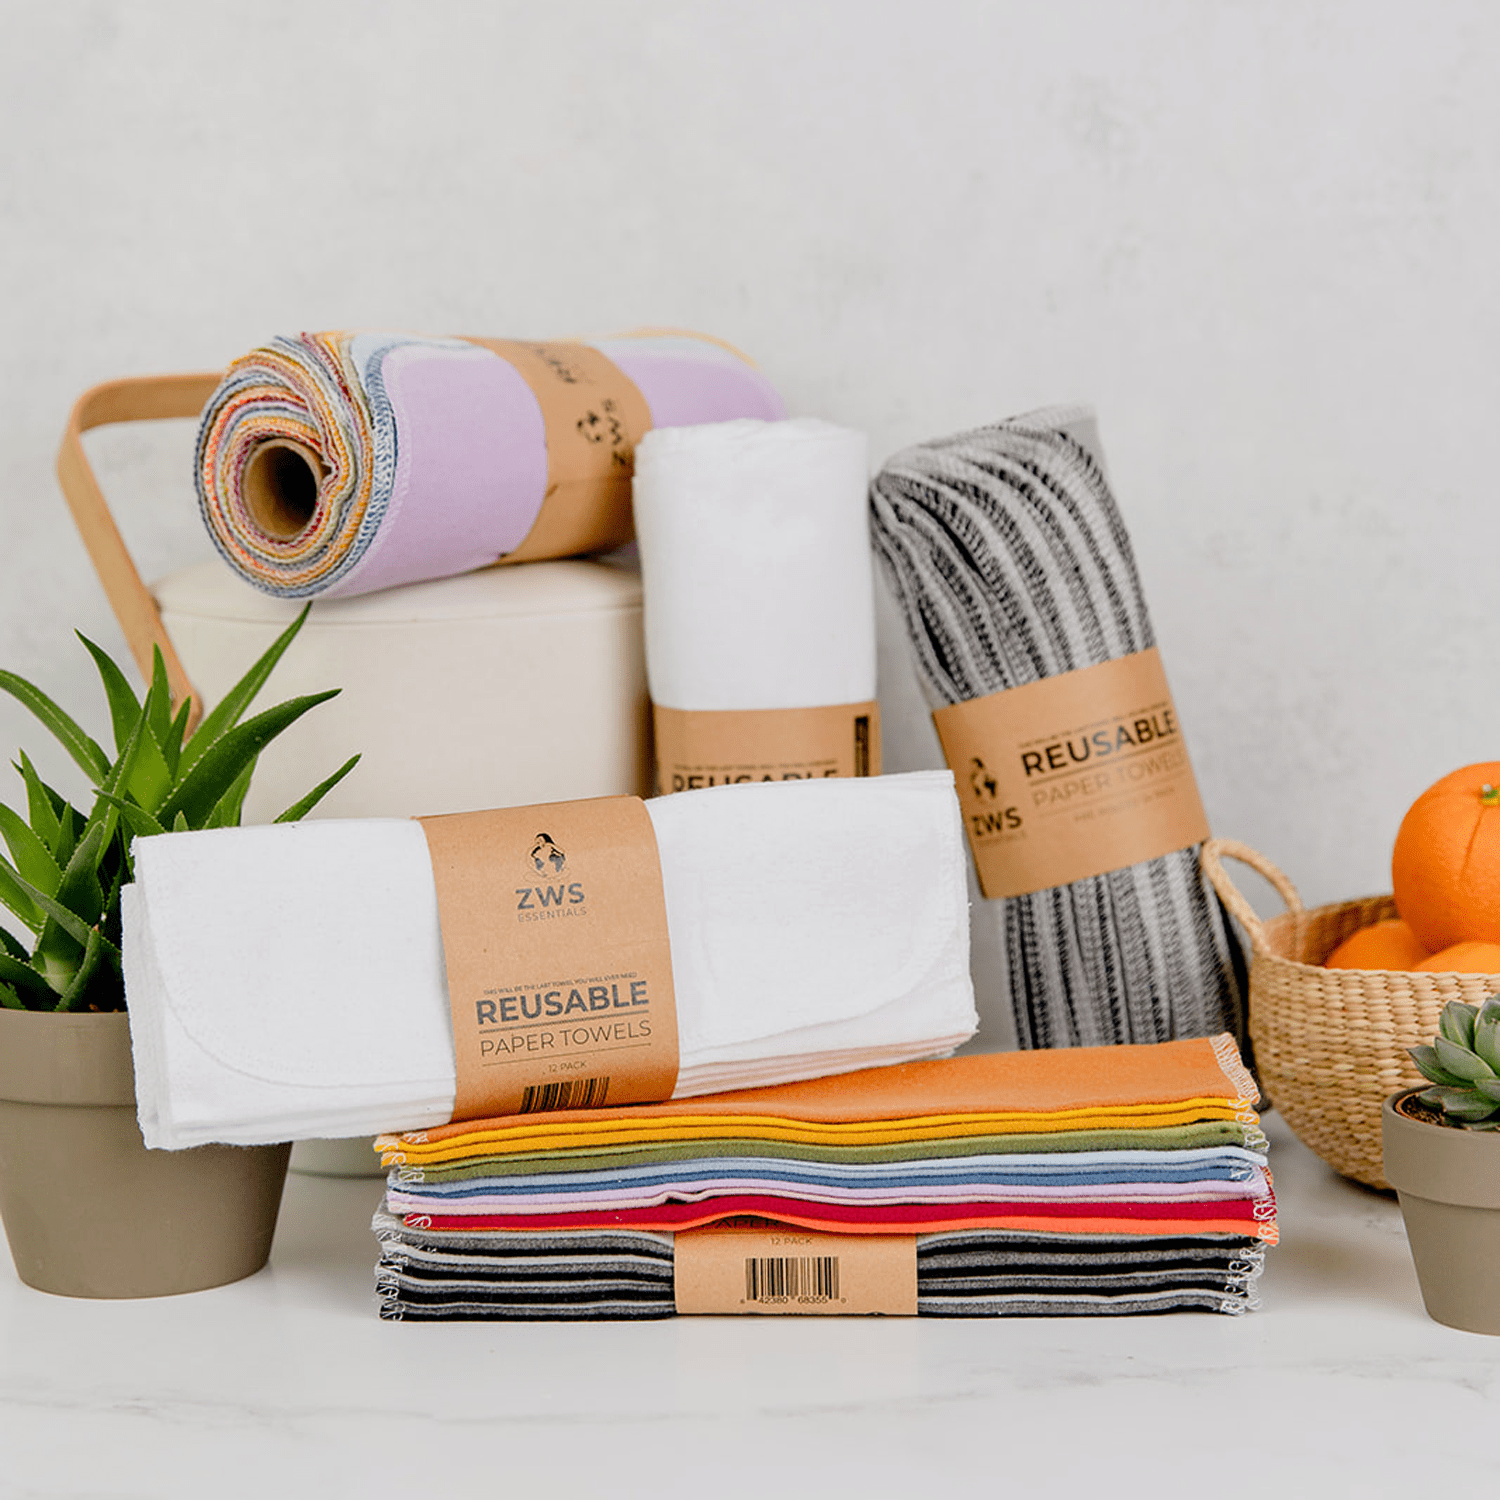 Unpaper Towels DIY: How To Make Reusable Paper Towels For Your